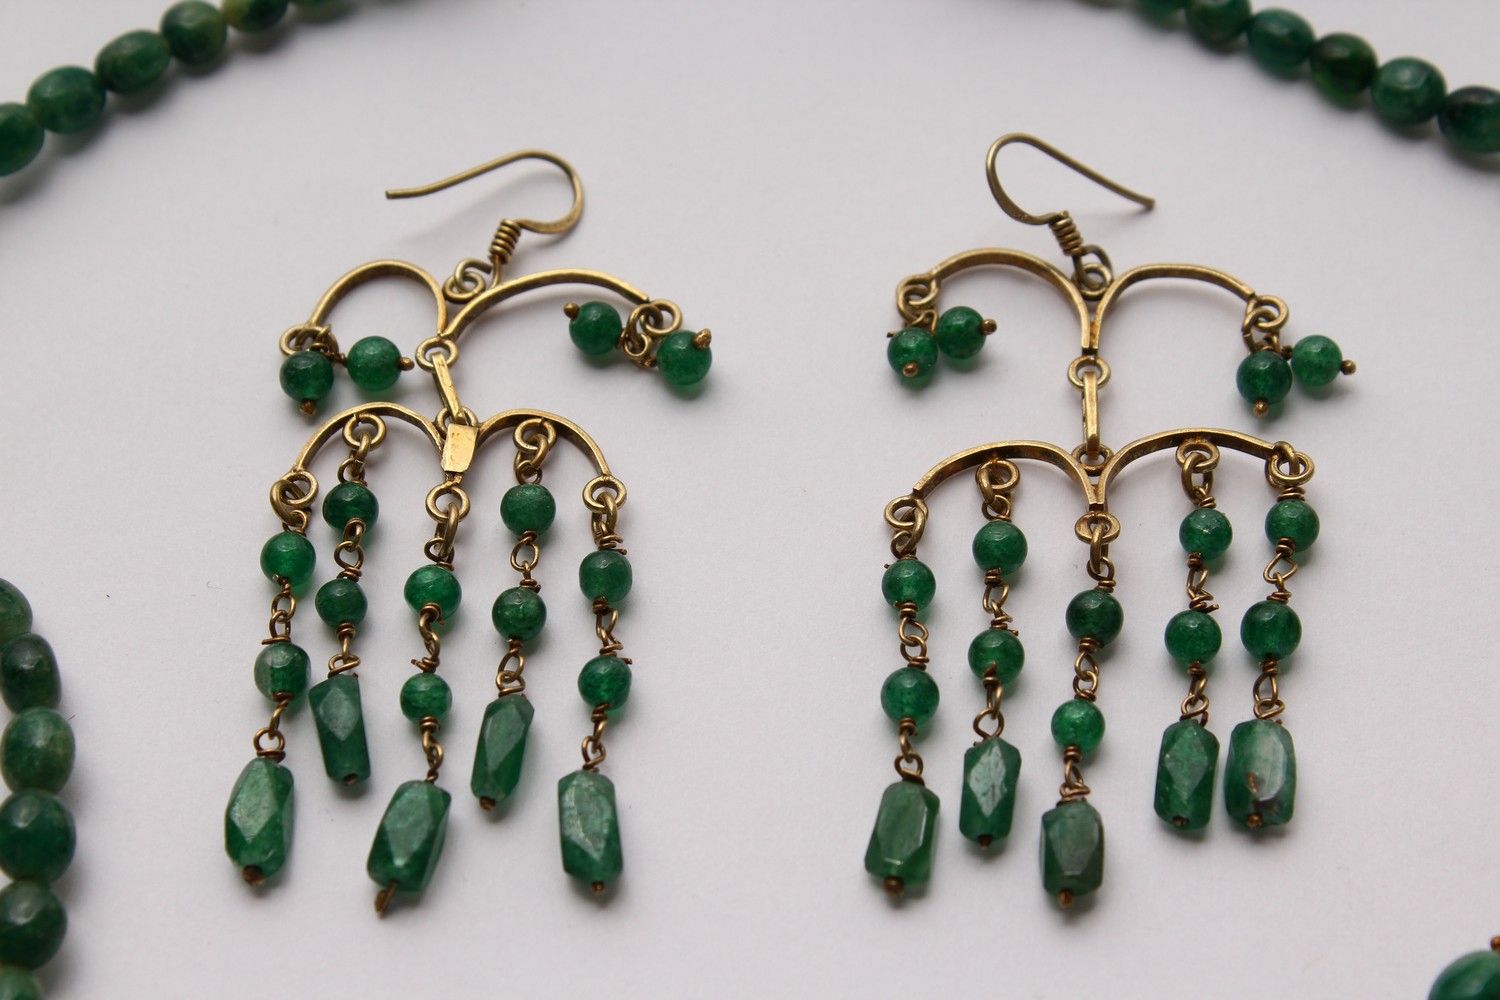 A SMALL GREEN BEAD NECKLACE, possibly natural emeralds, together with a pair of similar style - Image 2 of 3